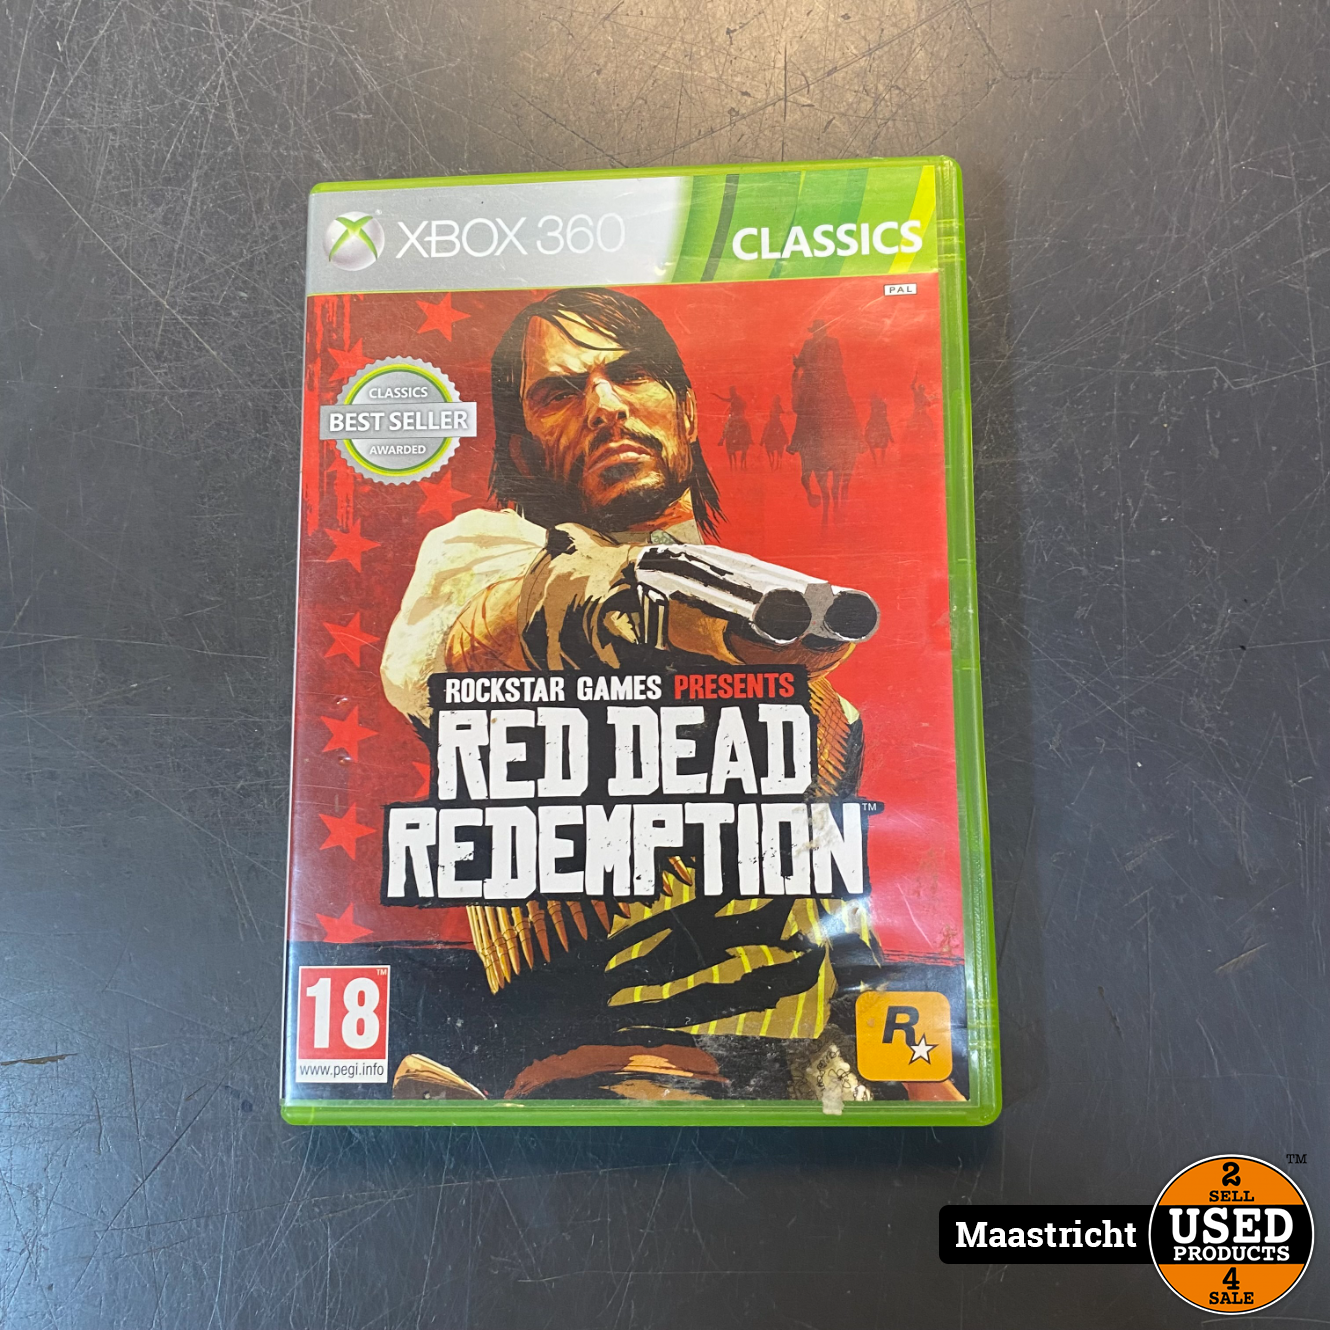 Belastingen as Uitputten Xbox 360 Game - Red dead Redemption - Used Products Maastricht